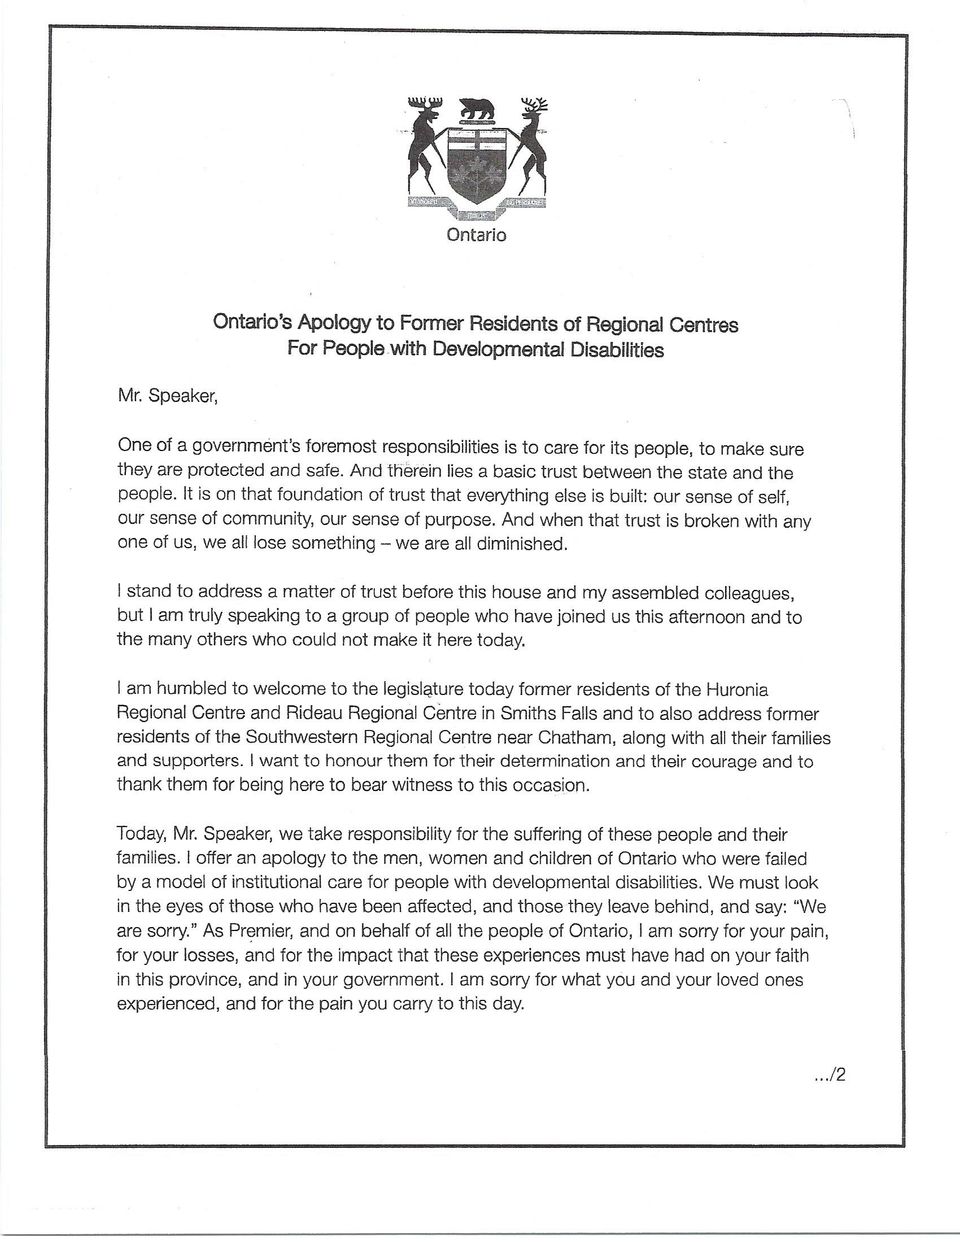 Ontario's Apology to Former Residents of Regional Centres For People with Developmental Disabilities Page 1